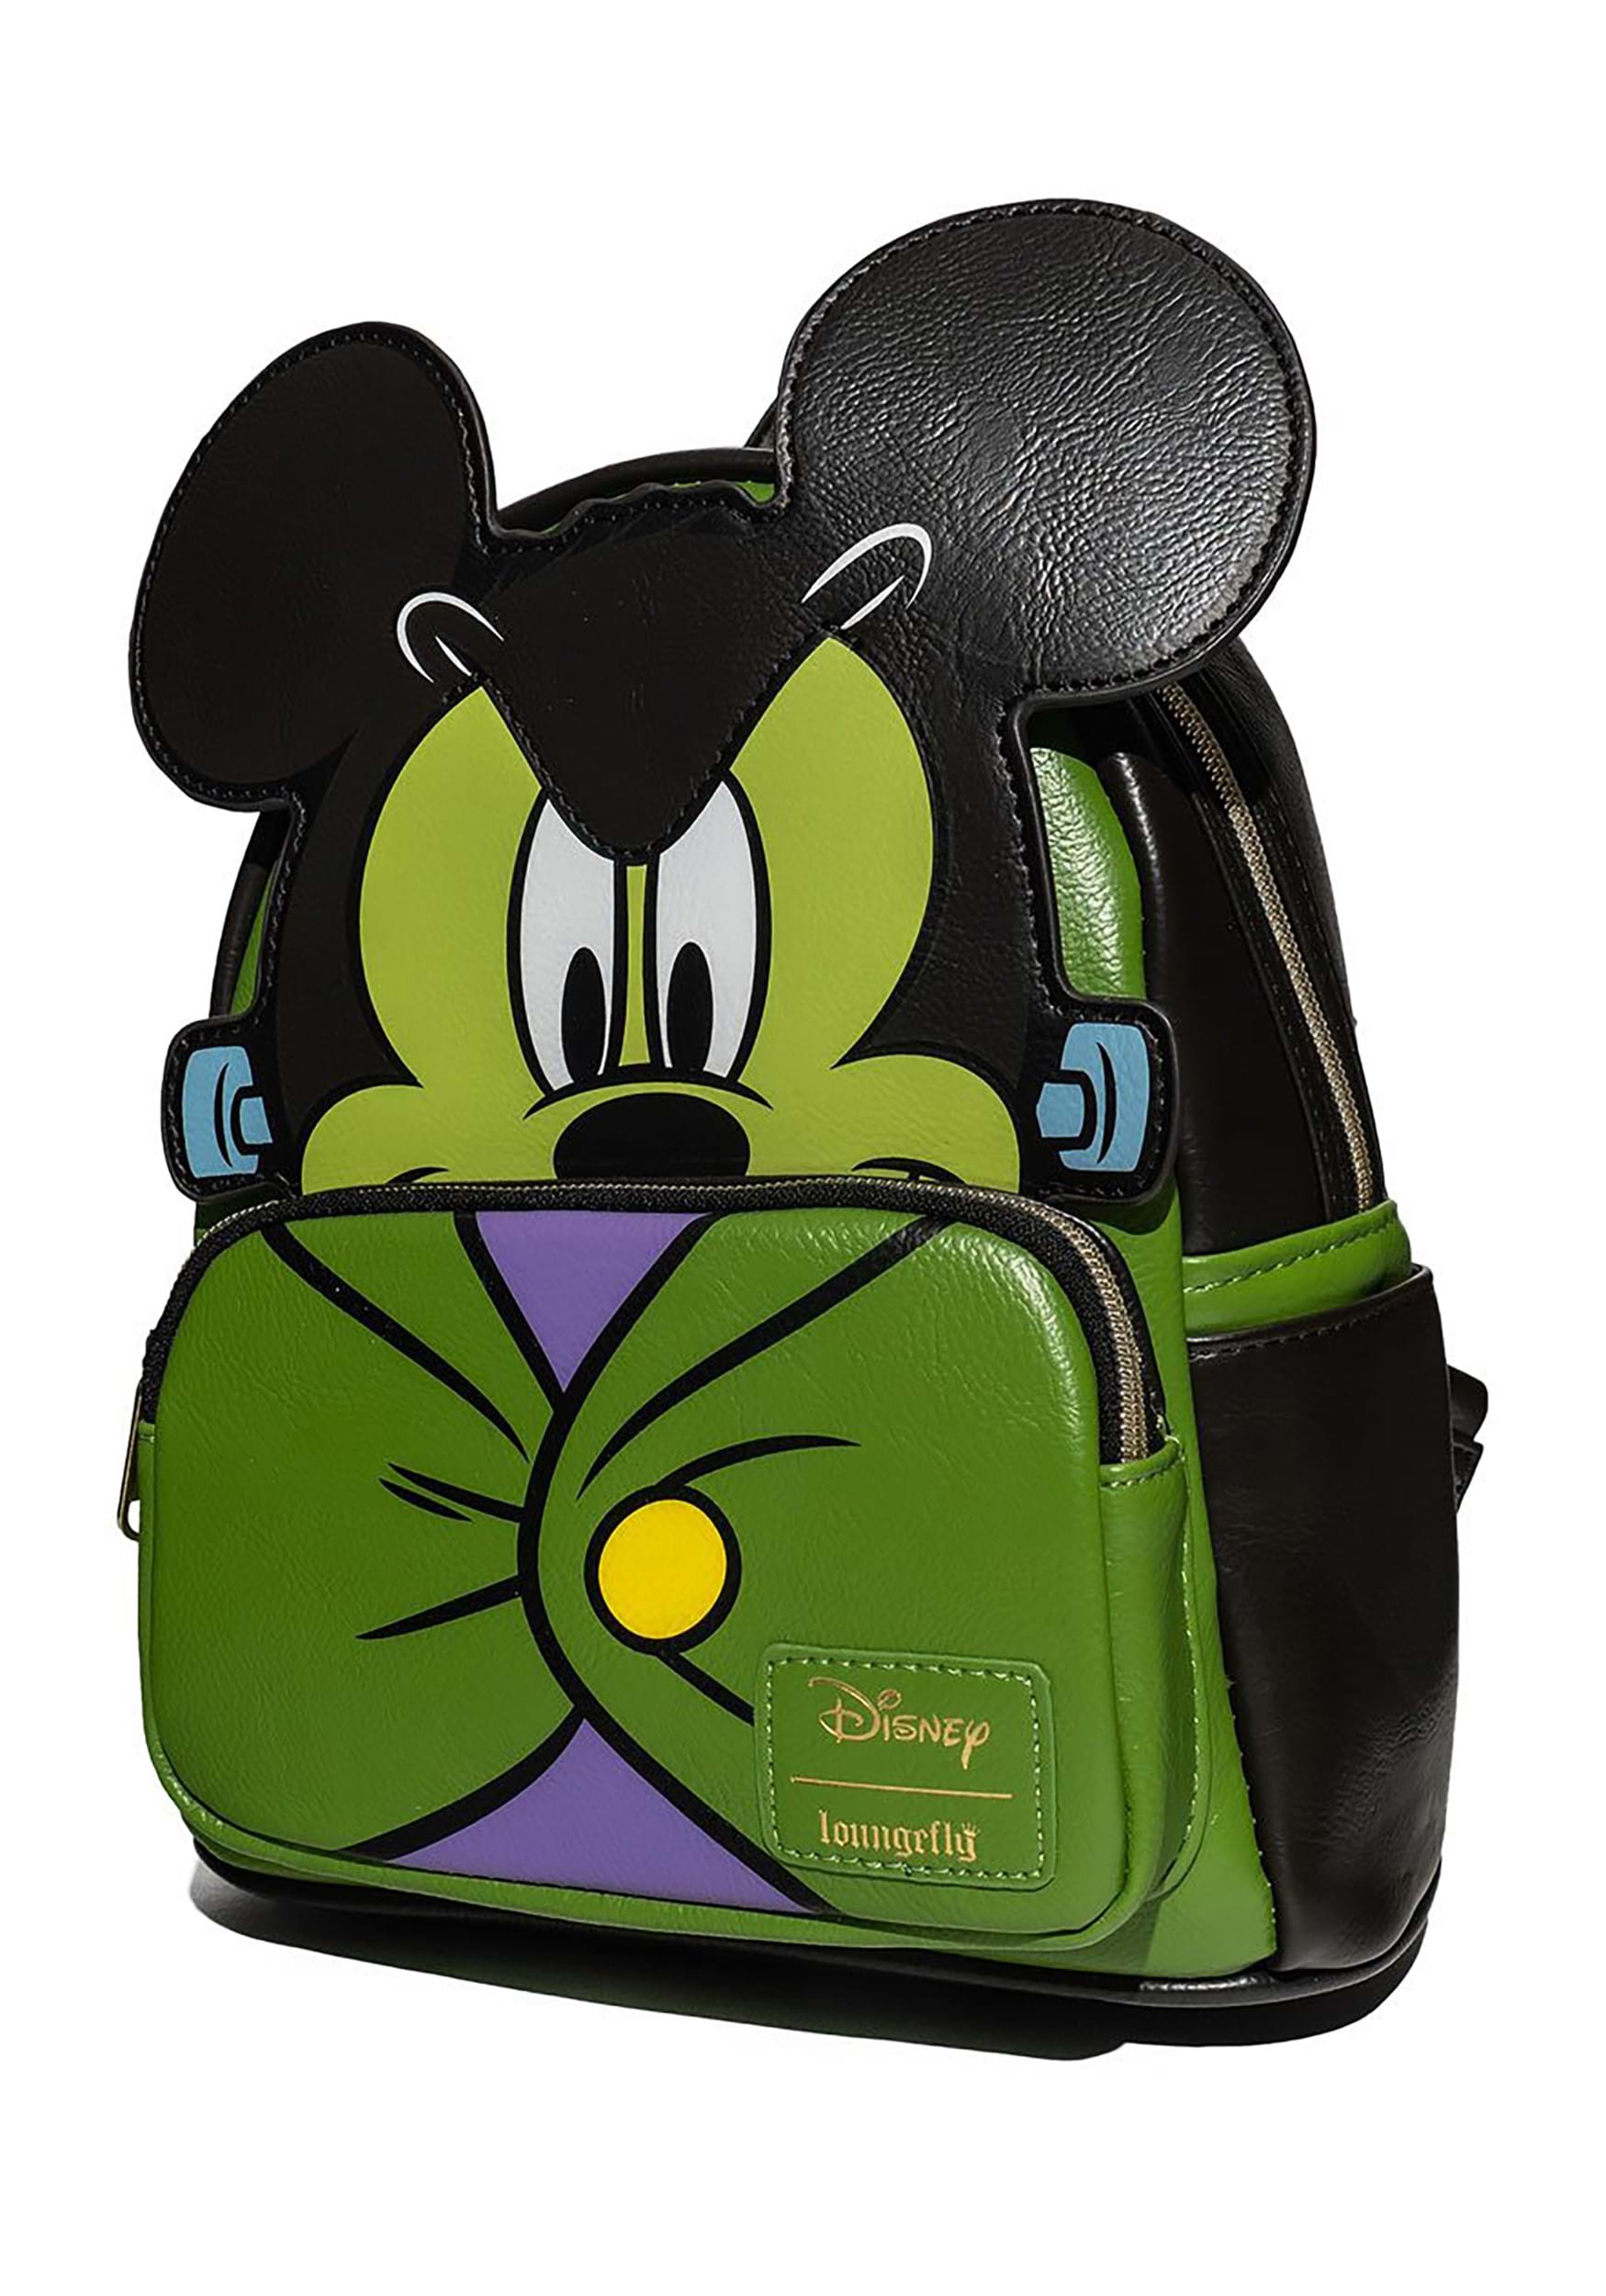 Kuber Industries Disney Mickey Mouse 15 Inch Waterproof Polyster School Bag/ Backpack for Kids, Black-KUBMART1947 : Amazon.in: Fashion